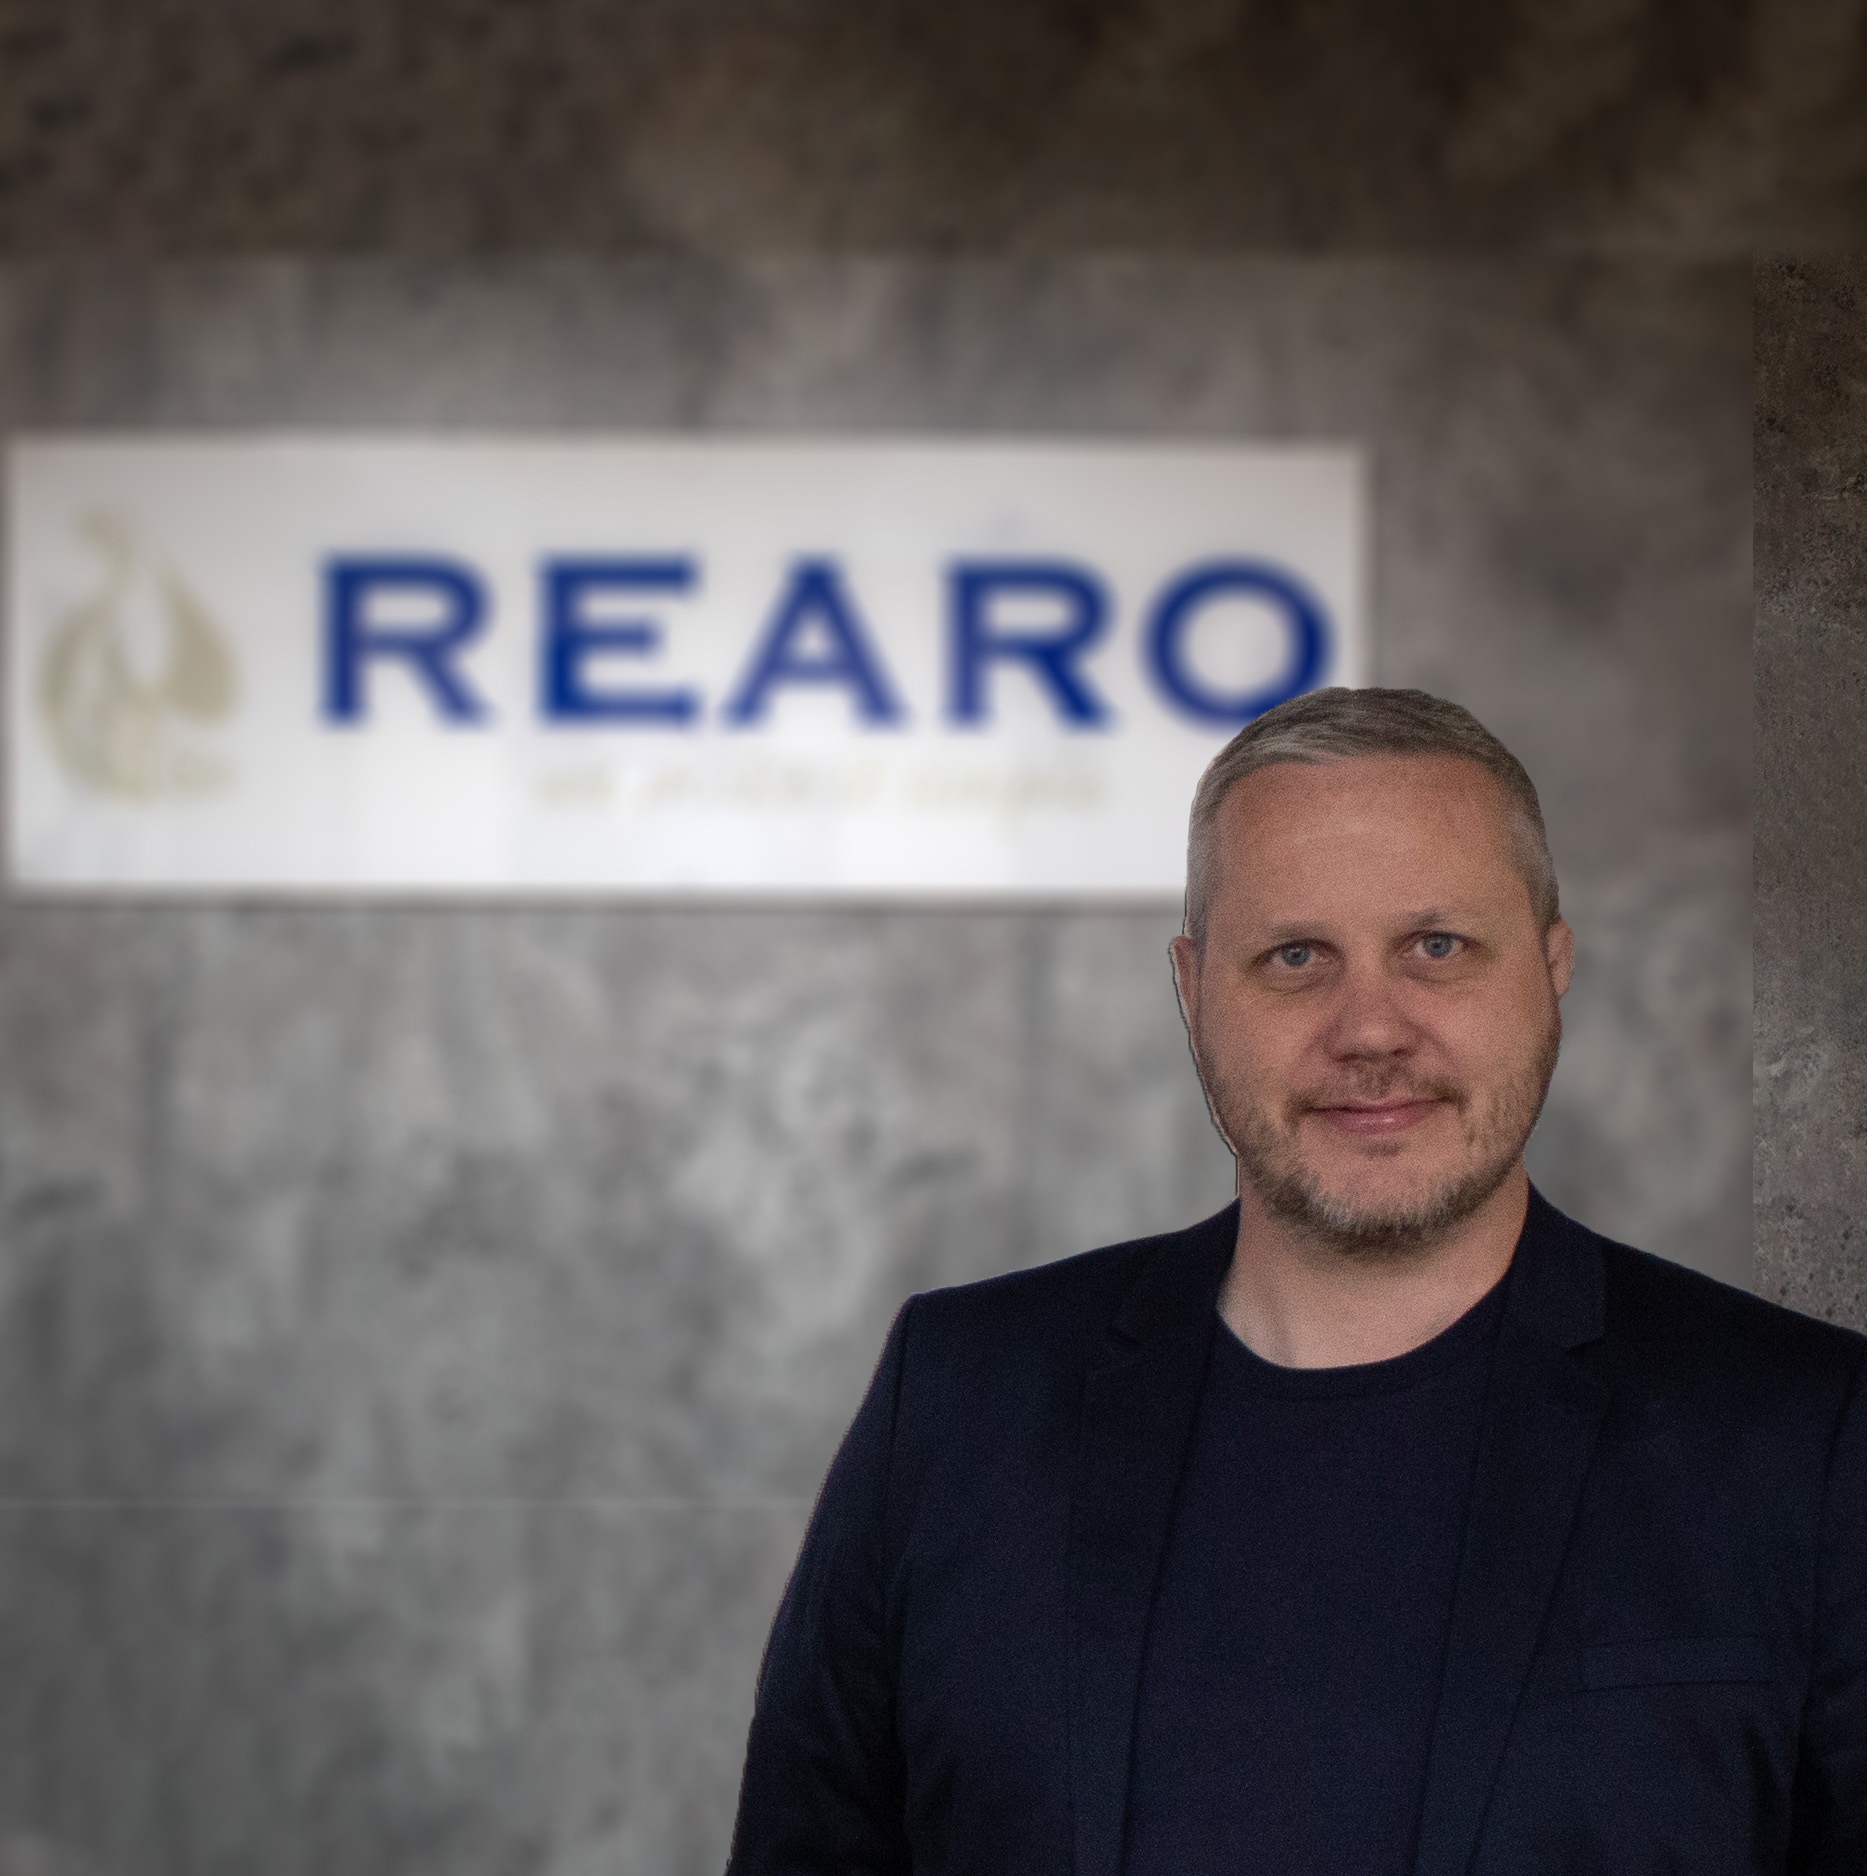 Rearo issues warning to businesses following cyber attack